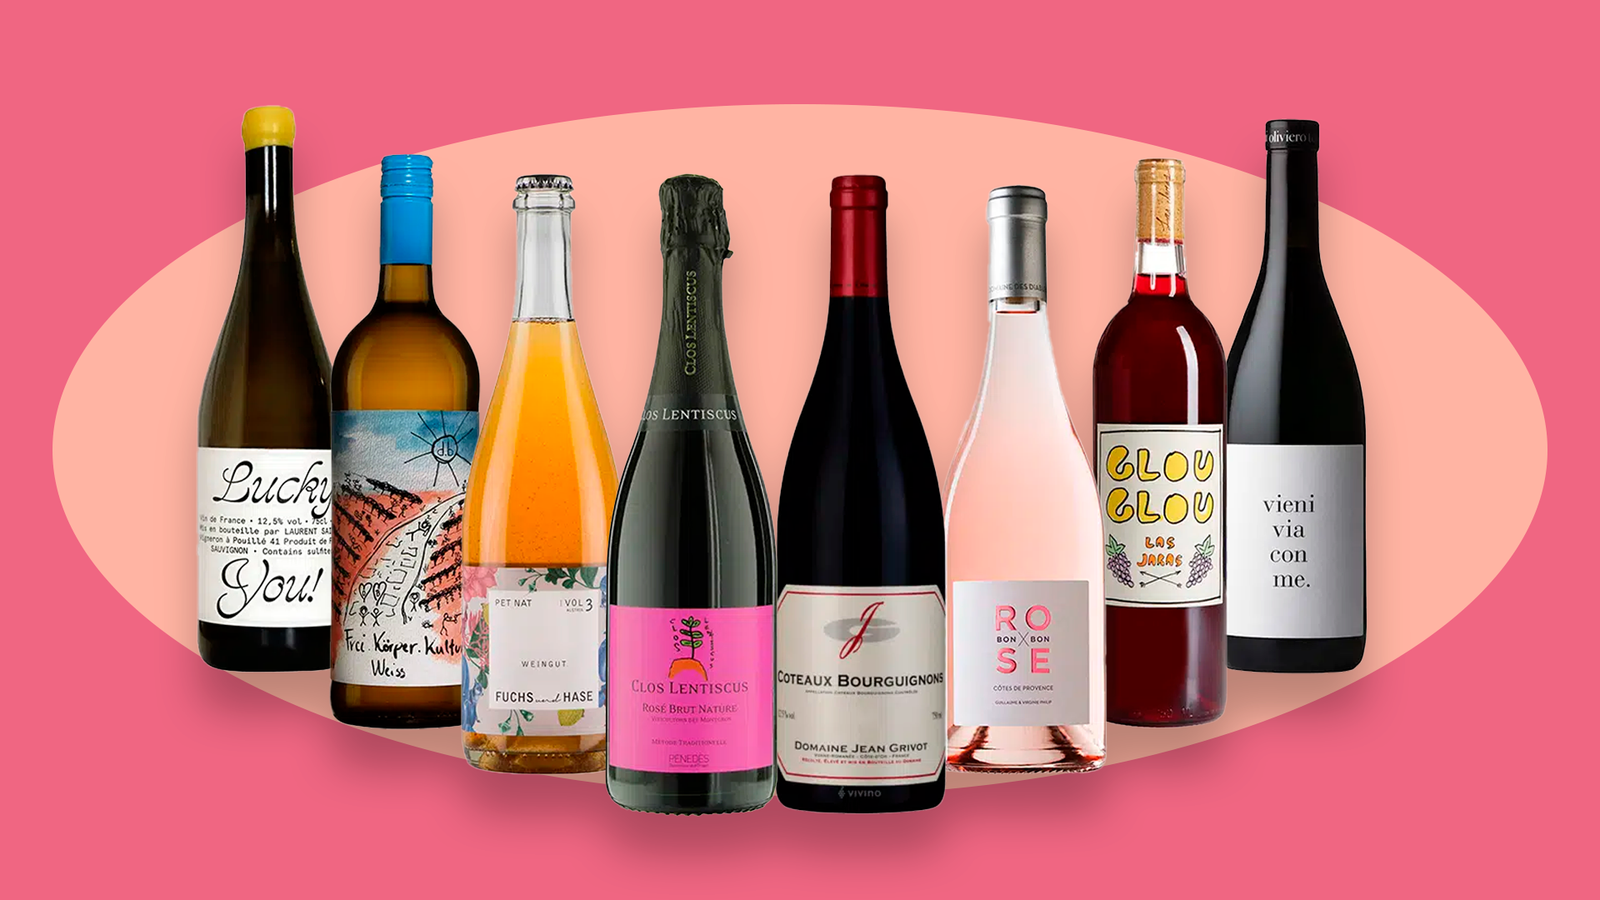 decent wines from wine shops owners' selection